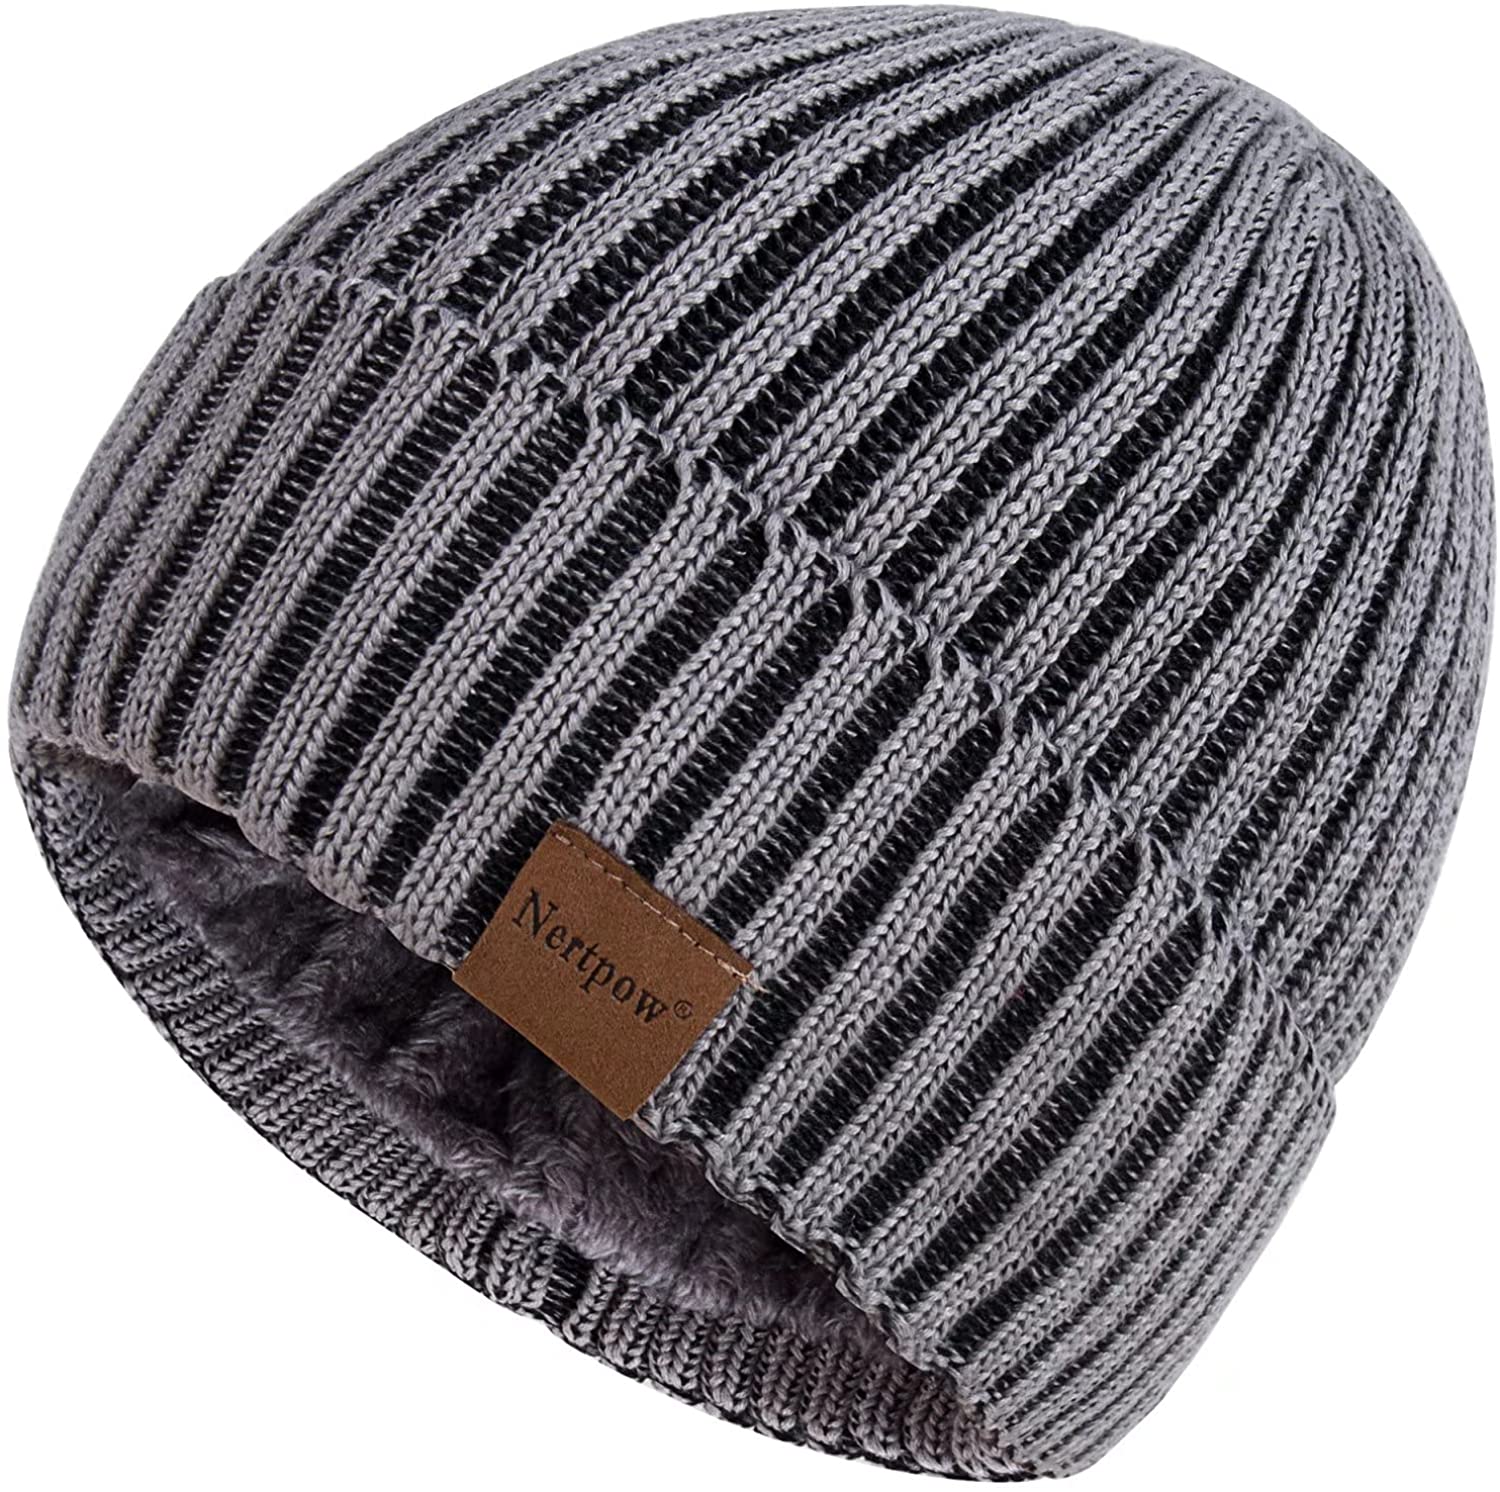 Winter Warm Fleece Lined Thermal Trendy Thick Knit Skull Cable Cuff Cap Nertpow Beanie Hat for Men and Women 